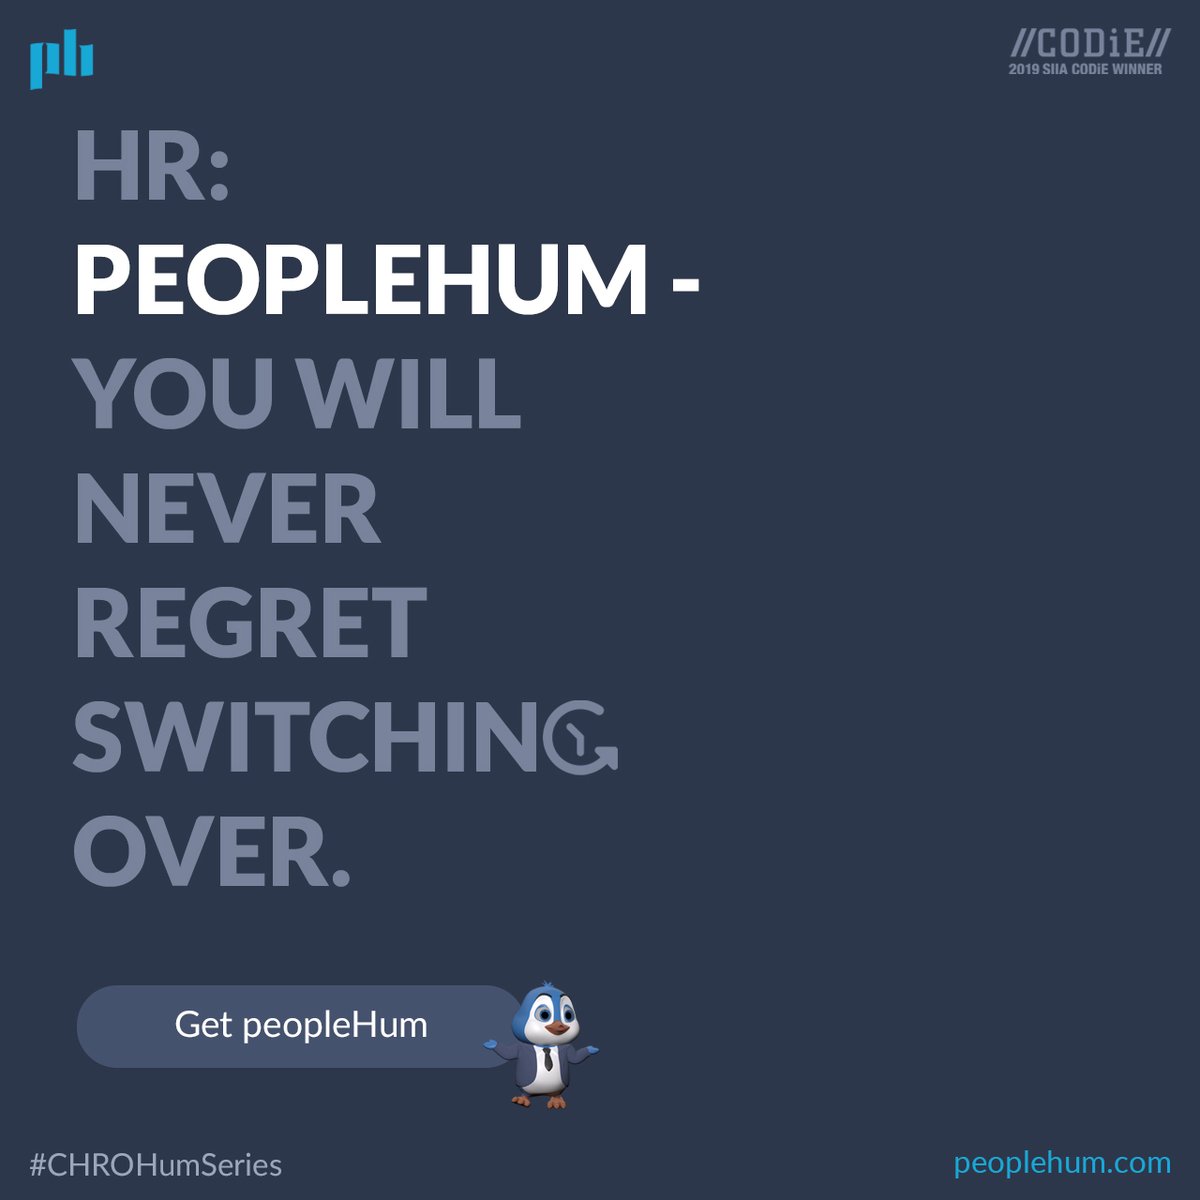 Ready for a smoother HR experience?
Schedule a demo today: s.peoplehum.com/xf1zr

#hr #hrcommunity #management #tech #techcommunity #workplaceinnovation #productivity #artificialintelligence #ai #business #usa #washington #newyork #losangeles #chicago